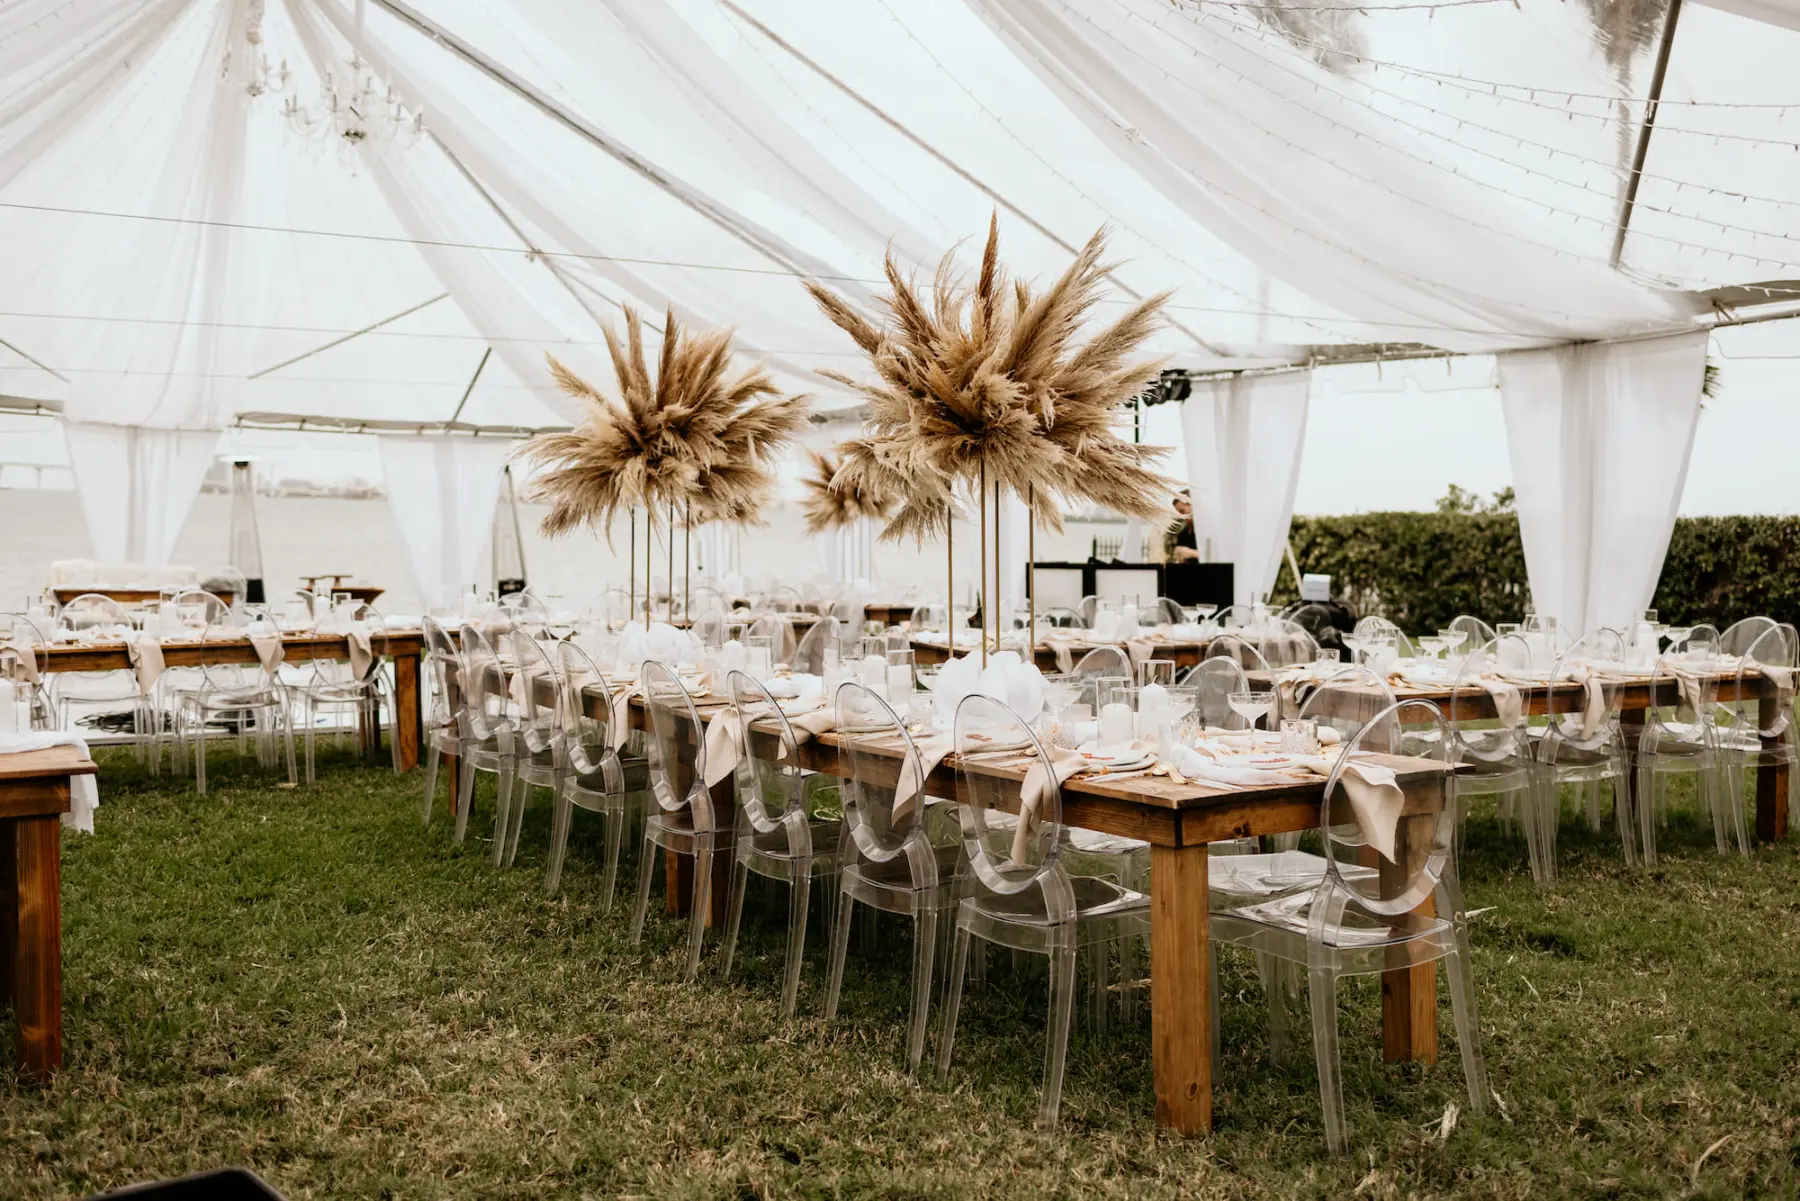 Clear Tented Boho Wedding Reception with Long Feasting Tables and Ghost Chairs | Pampas Grass Centerpiece Ideas